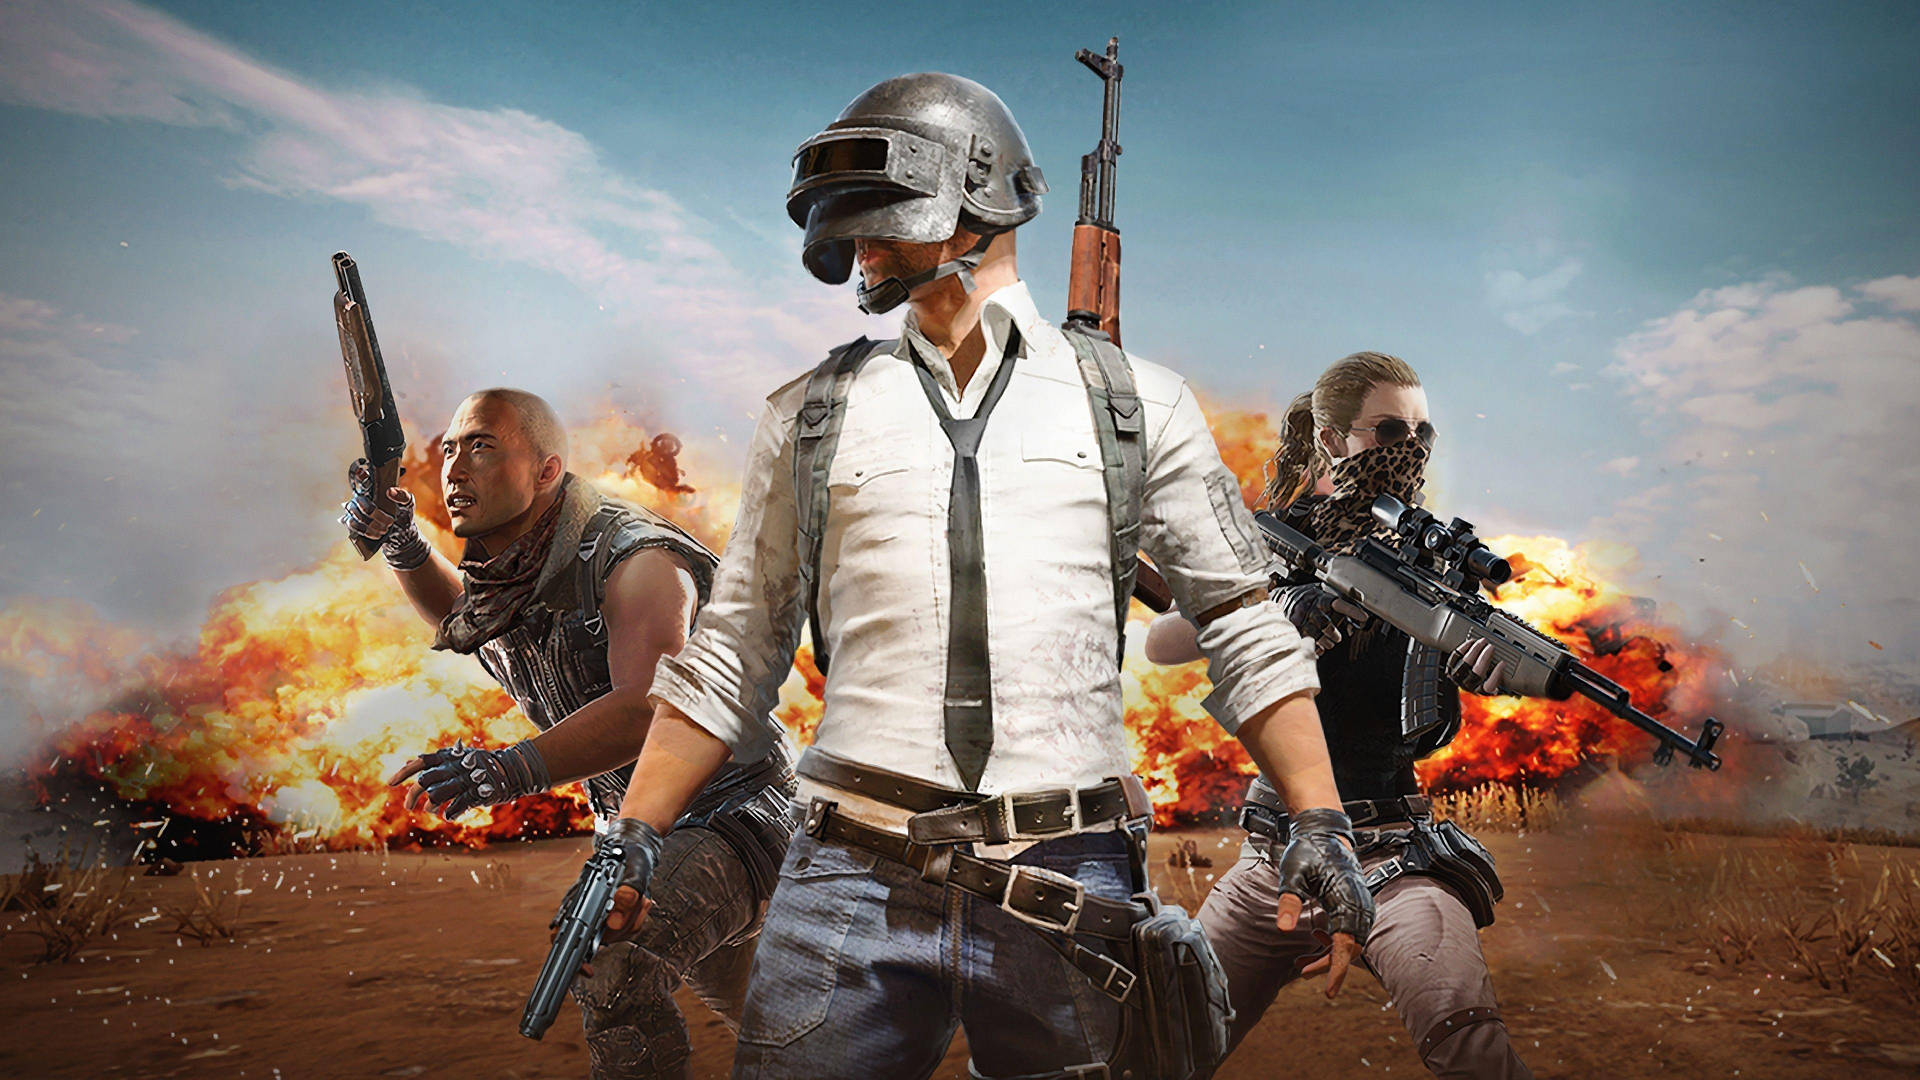 Pubg Hd Helmet Character And Other Players Explosion Wallpaper